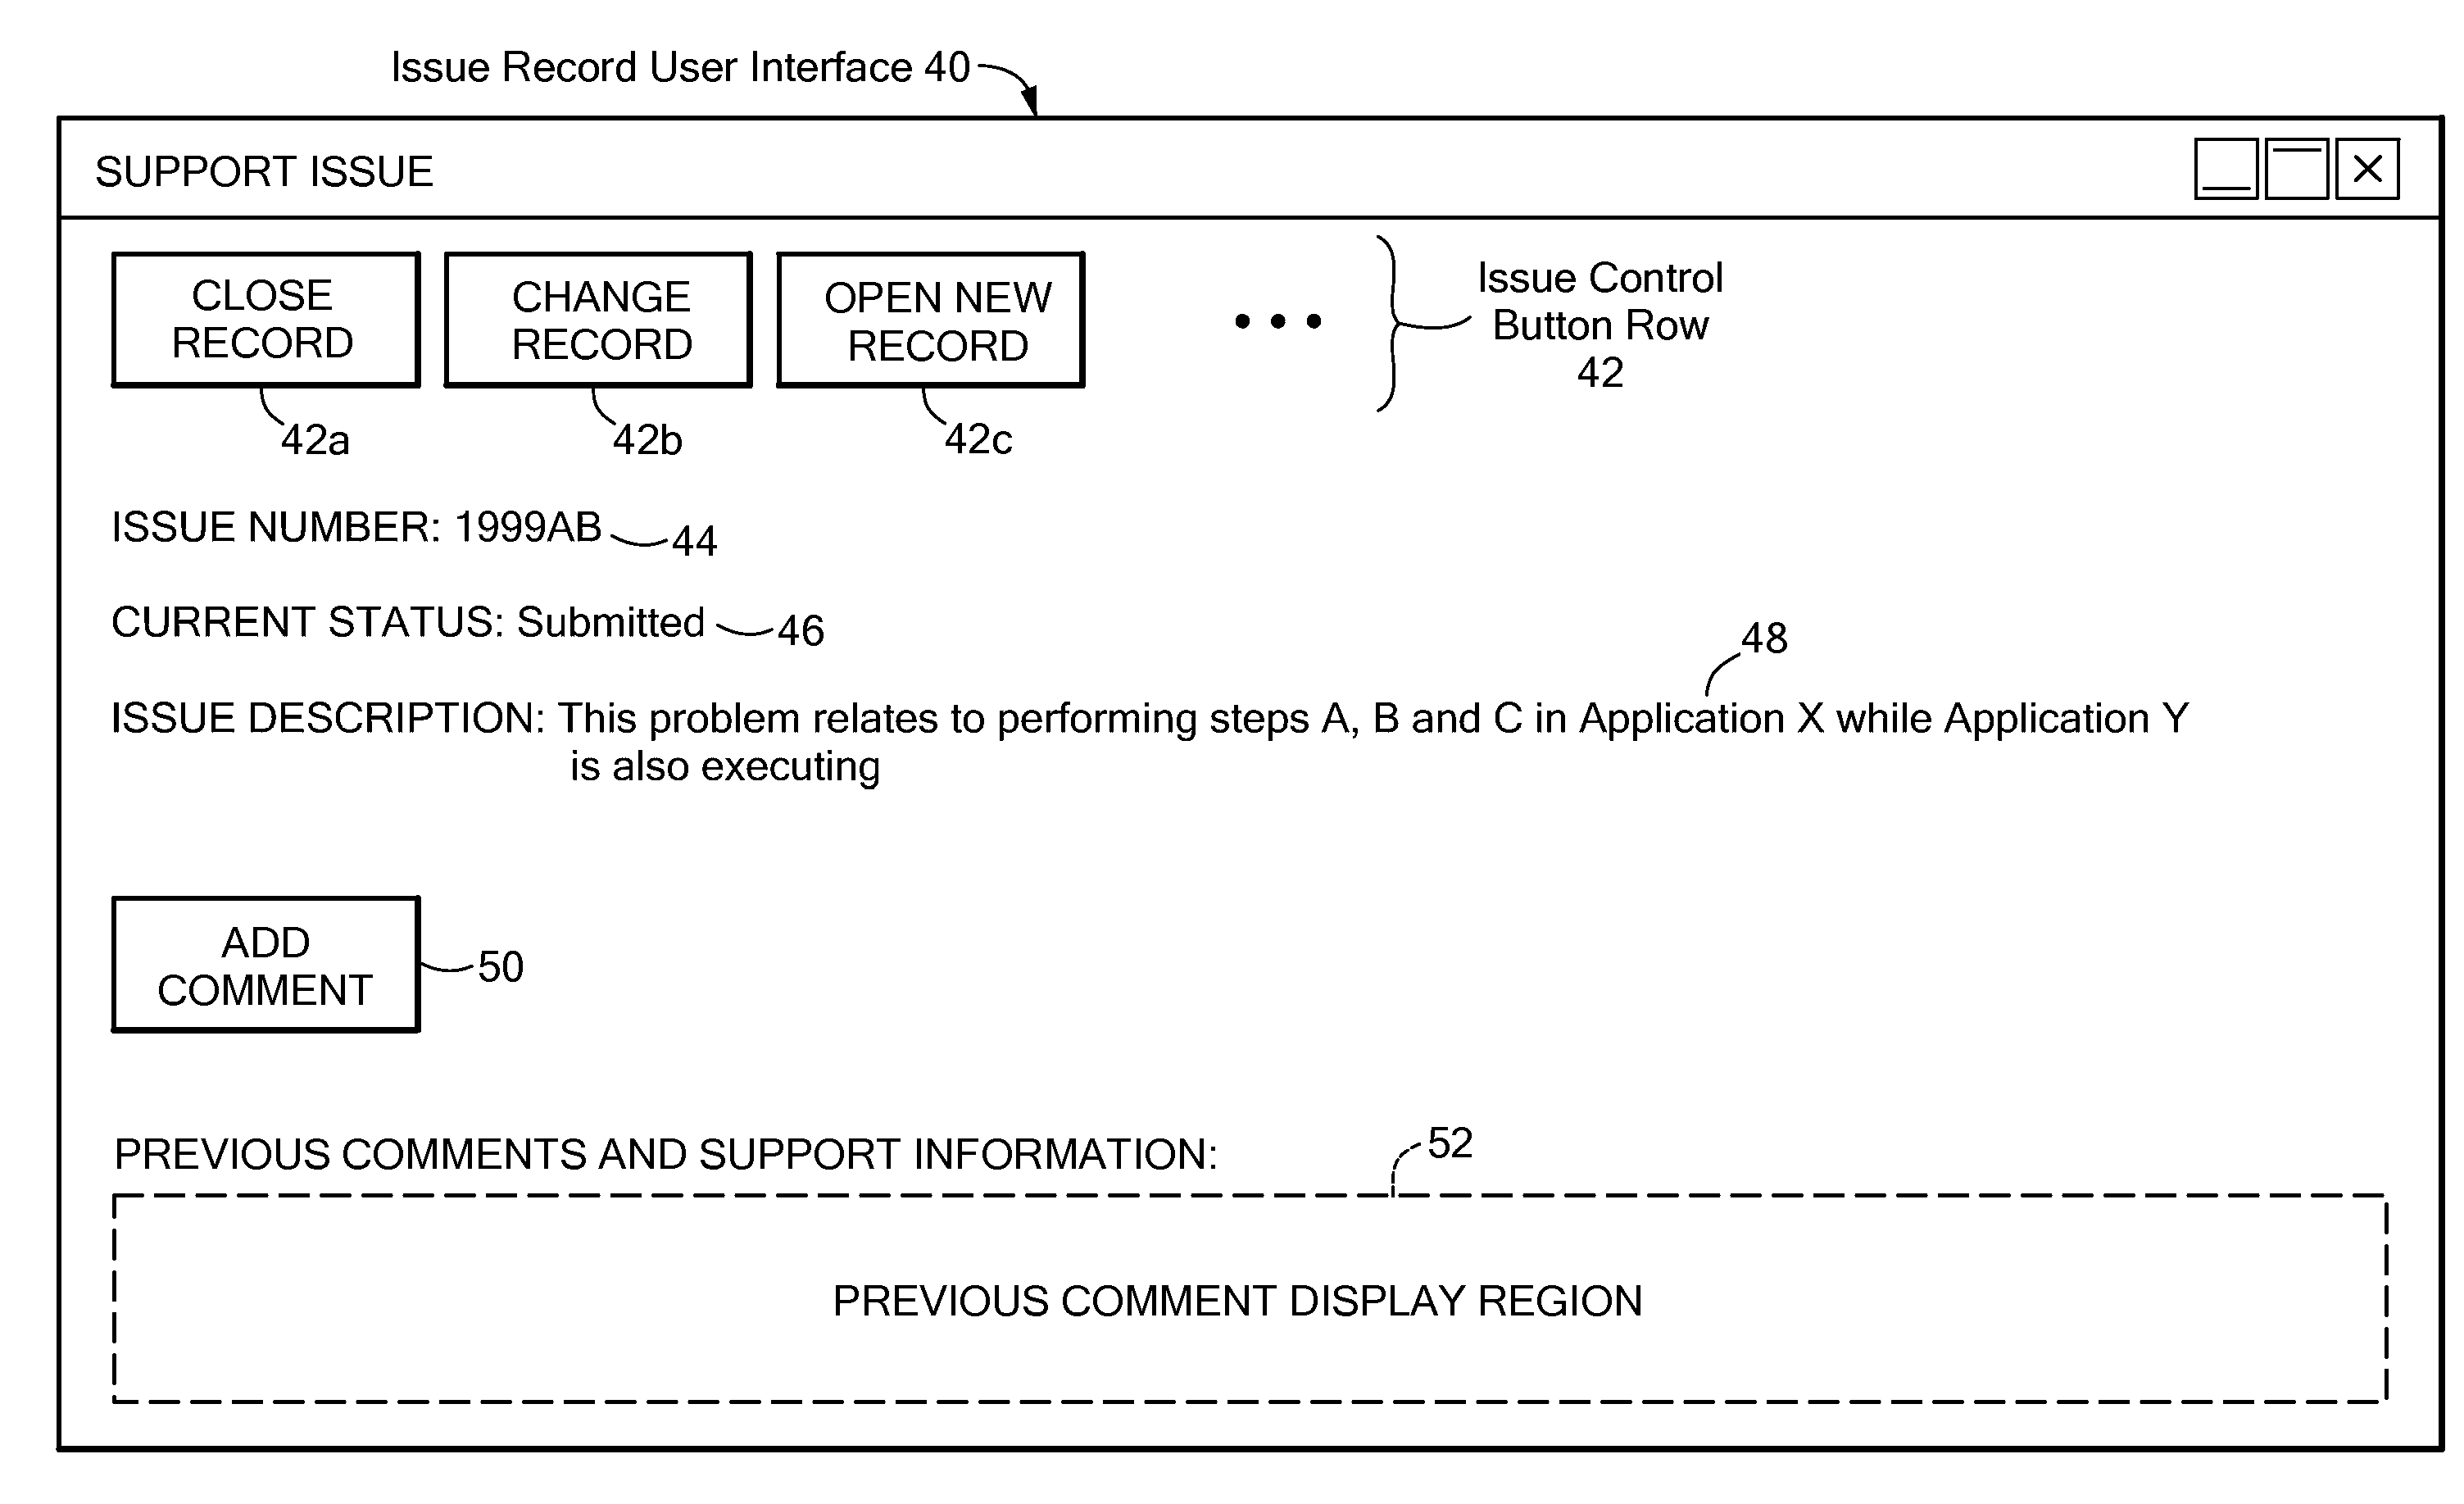 System and method for efficiently processing comments to records in a database, while avoiding replication/save conflicts